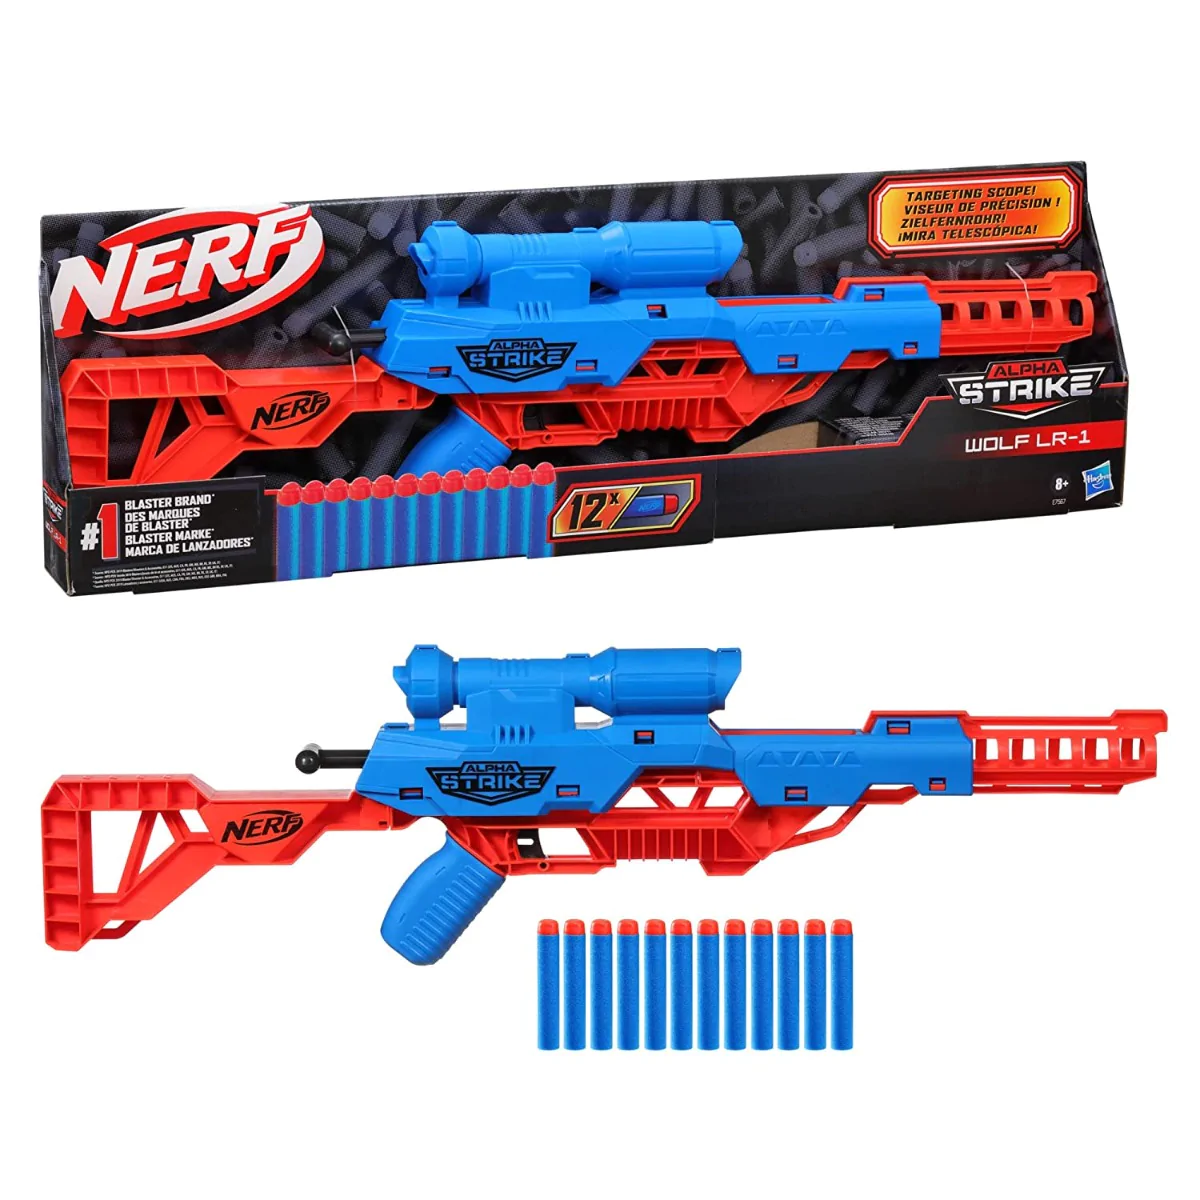 nerf_alpha_strike_wolf_lr-1_blaster_with_targeting_scope_12_official_nerf_elite_darts_breech_load_pump_action_easy_load-prime-fire_multicolor_4